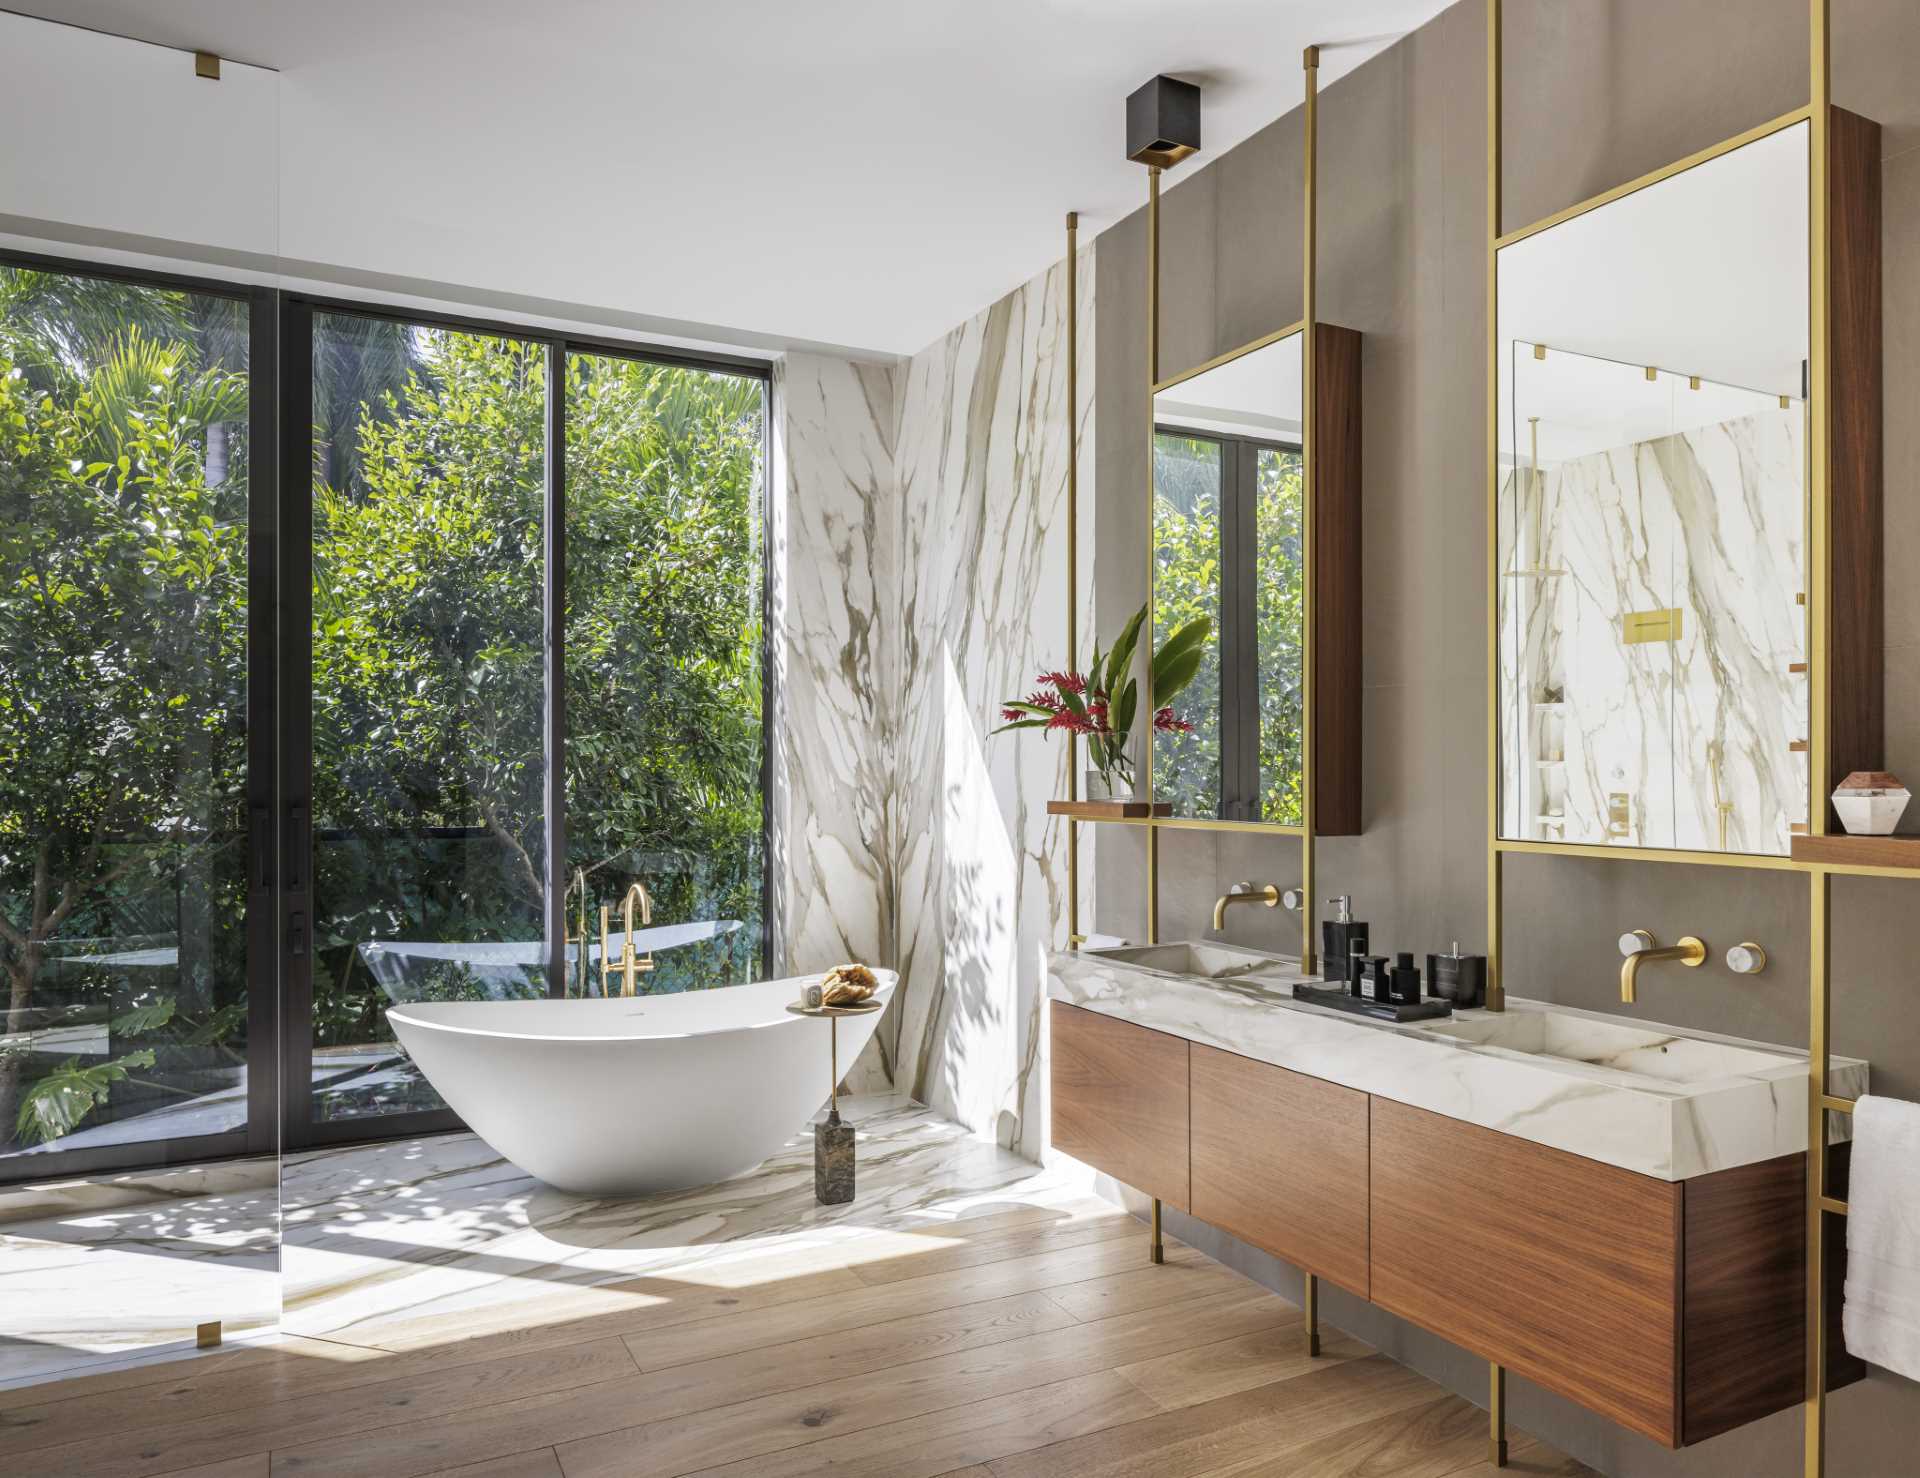 This modern bathroom has a freestanding bathtub by the windows, while the double vanity has a pair of bronze framed mirrors.